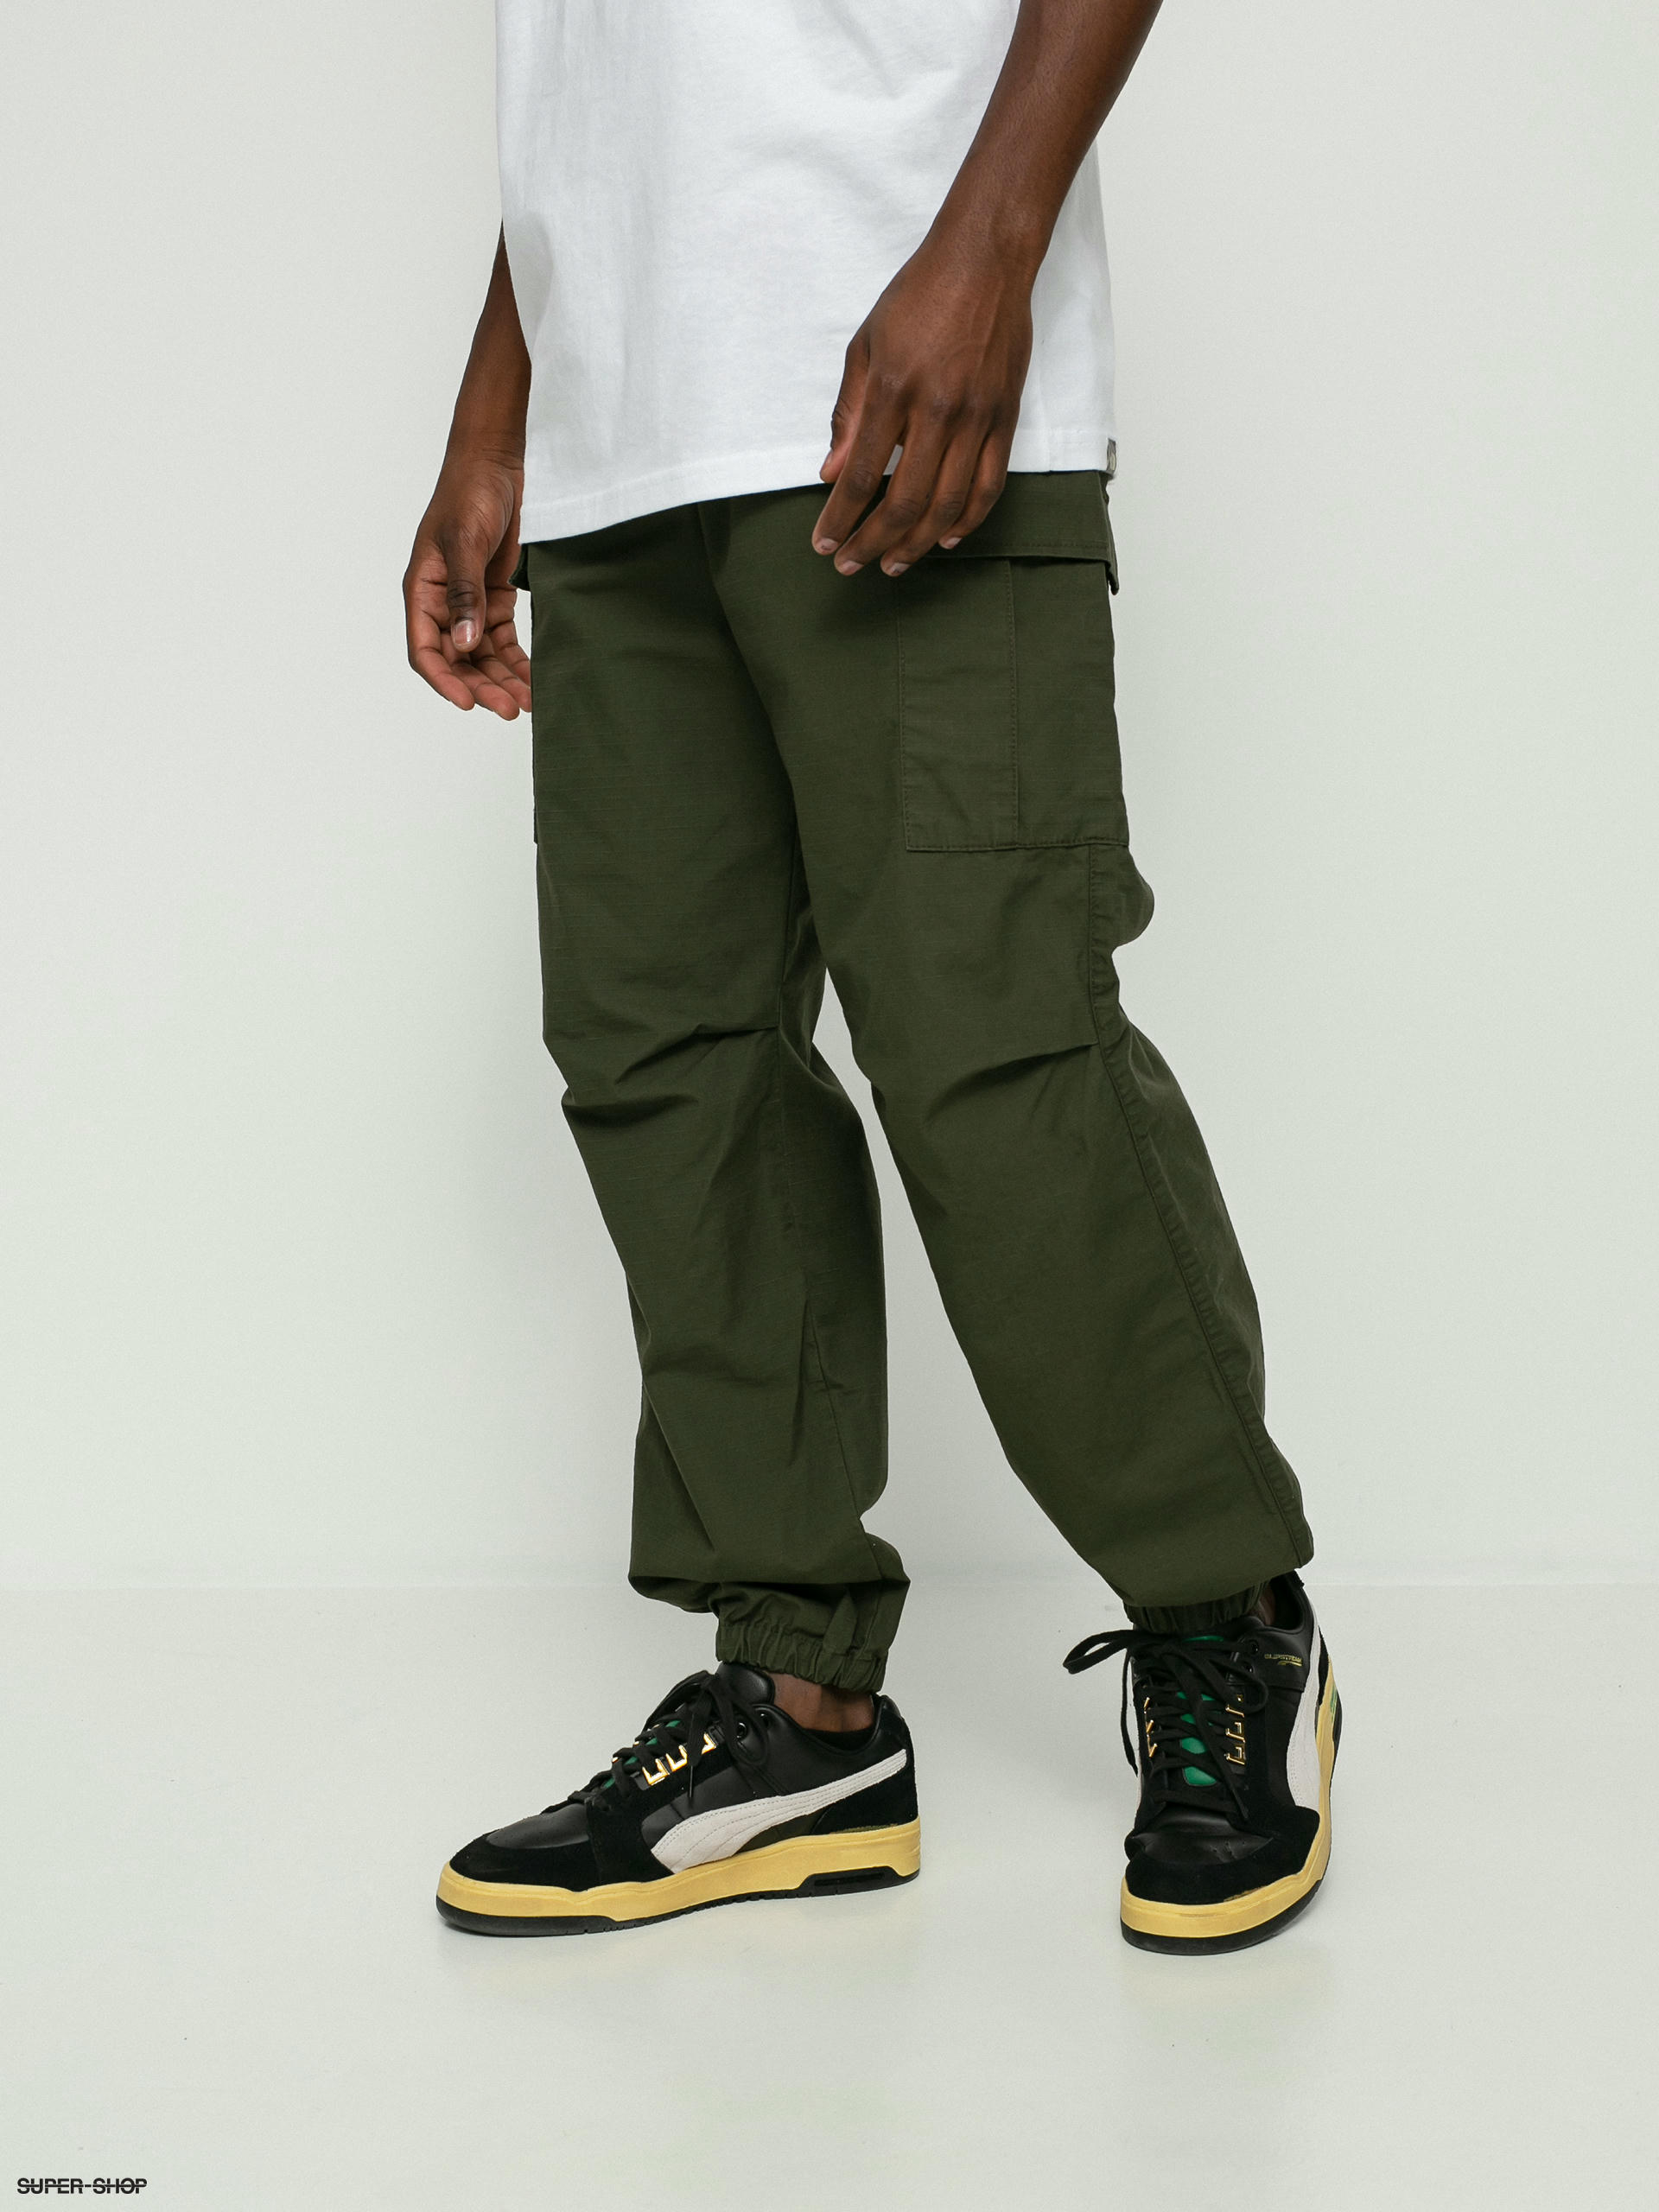 Jogger Pants Are Taking Over Menswear